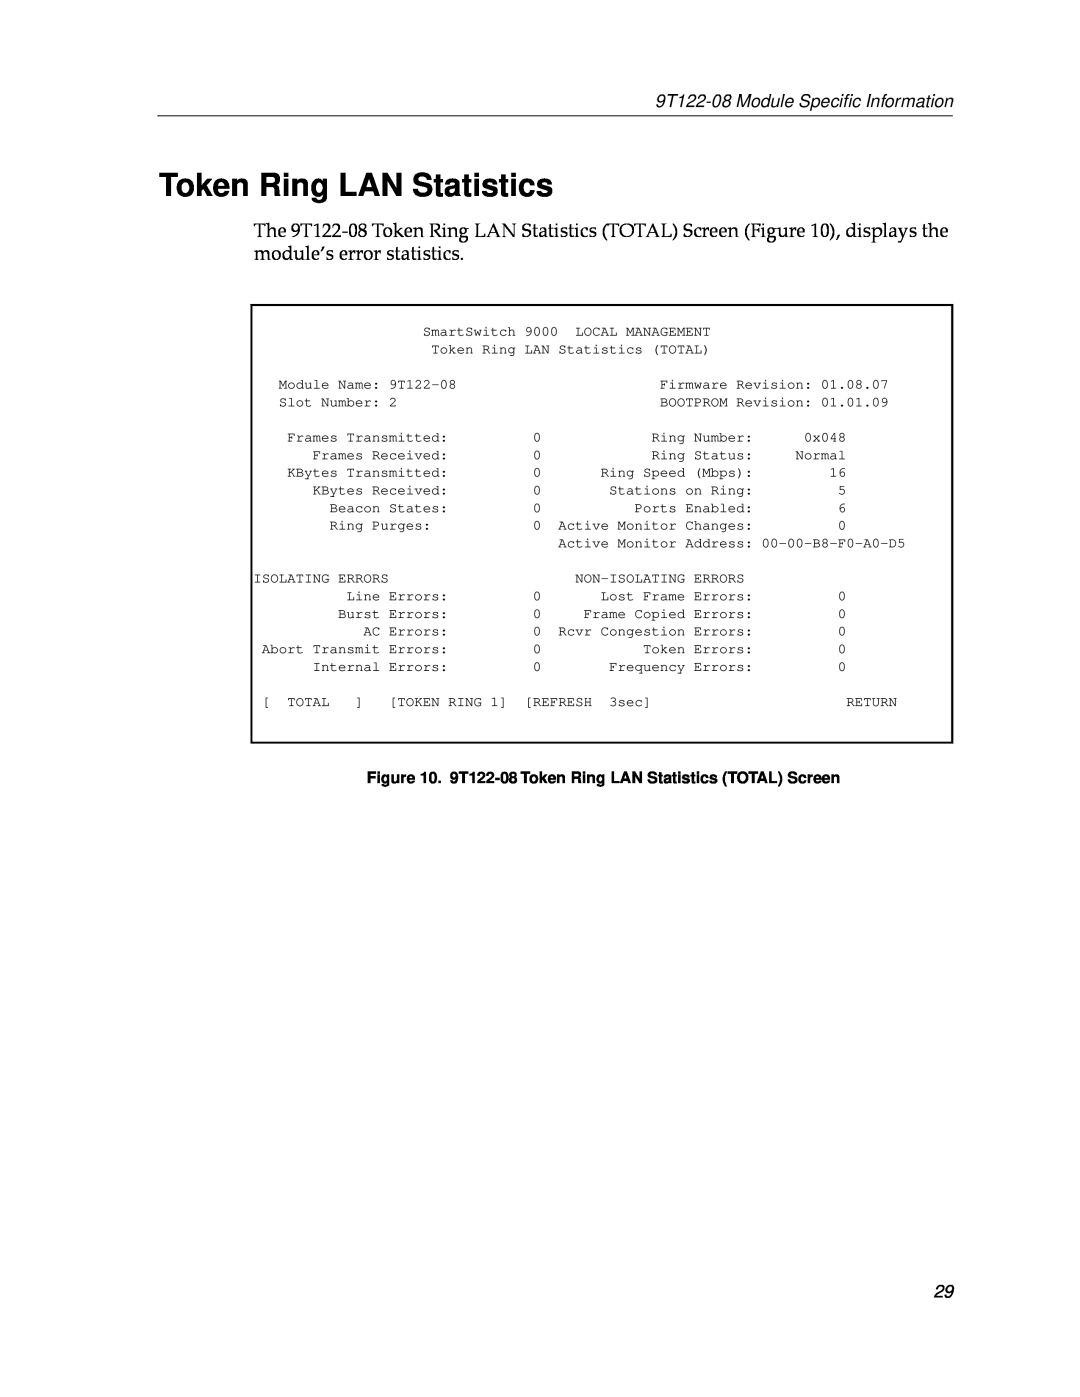 Cabletron Systems appendix Token Ring LAN Statistics, 9T122-08 Module Speciﬁc Information 